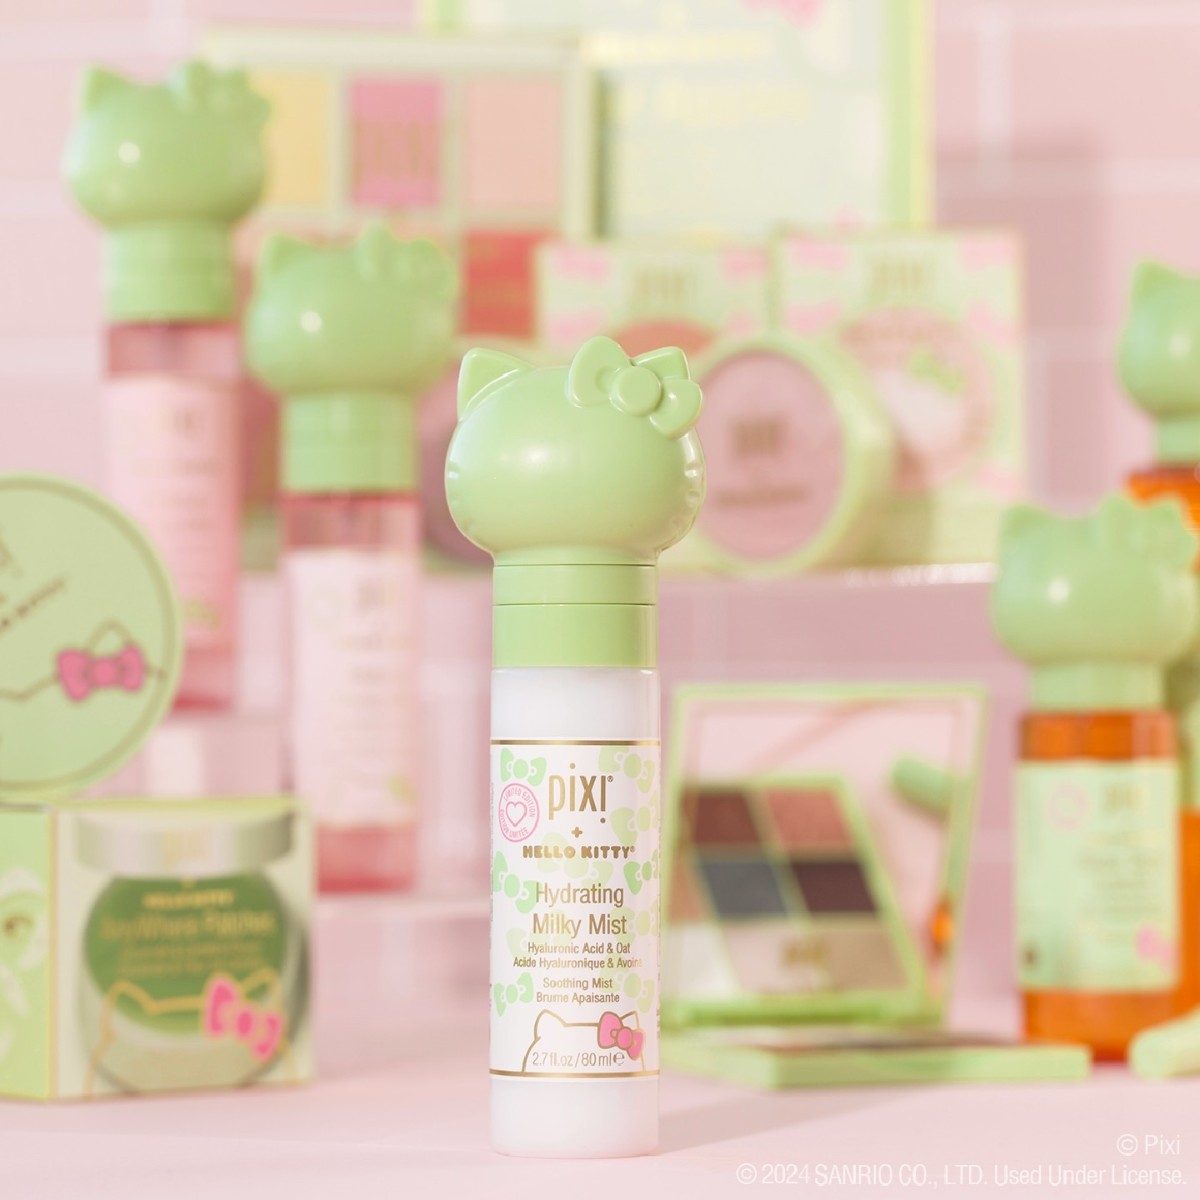 Our Hydrating Milky Mist, with a @HelloKitty flair, is the perfect pick-me-up to deeply hydrate, nourish and balance all skin-moods. Hyaluronic Acid, Black Oat Extract and B Vitamin Complex team up to quench complexion! #PixiBeauty #HelloKitty #Skintreats #BowMeetsGLOW